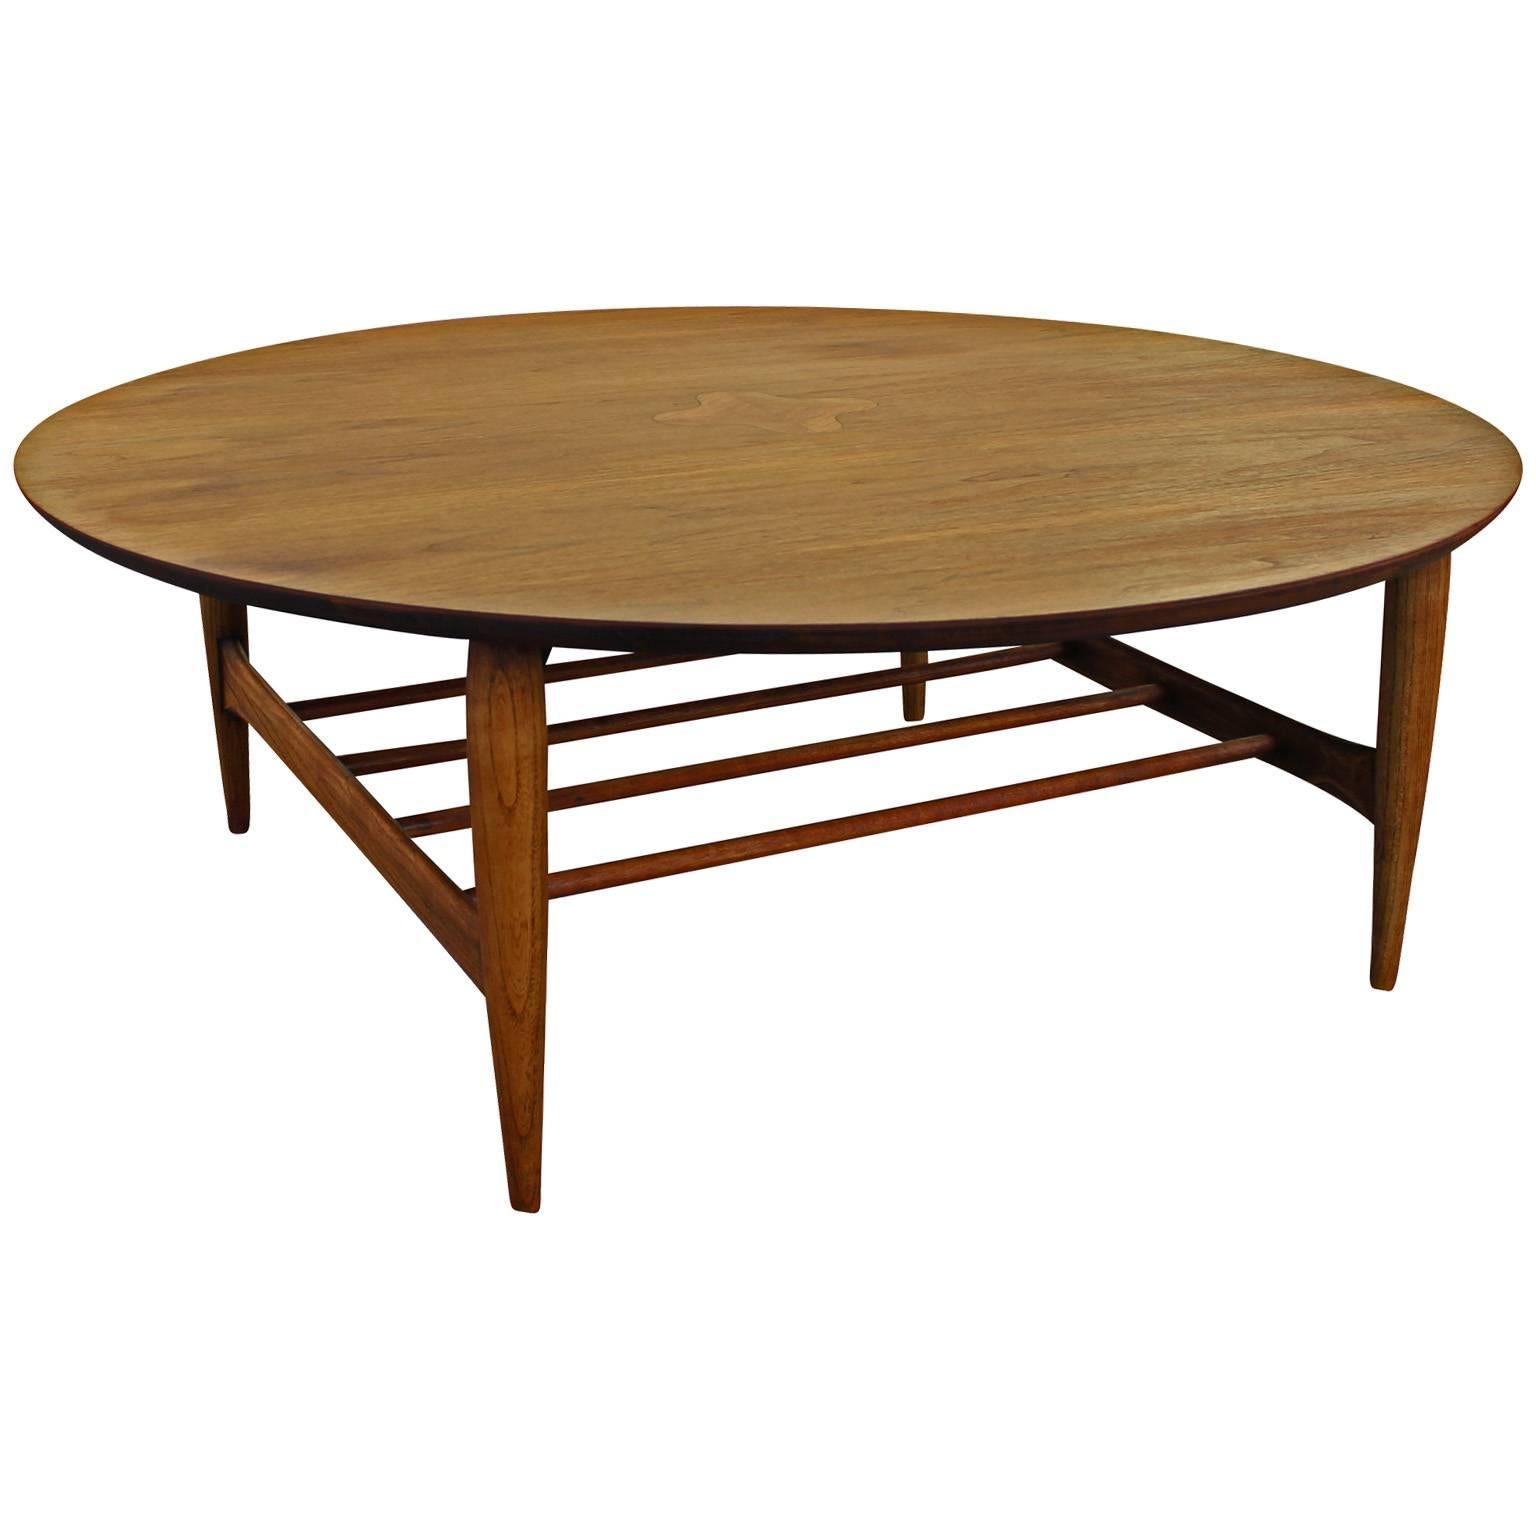 Great walnut inlaid round coffee table made by the Lane furniture Company circa 1960. The table has been restored and is in excellent condition. 